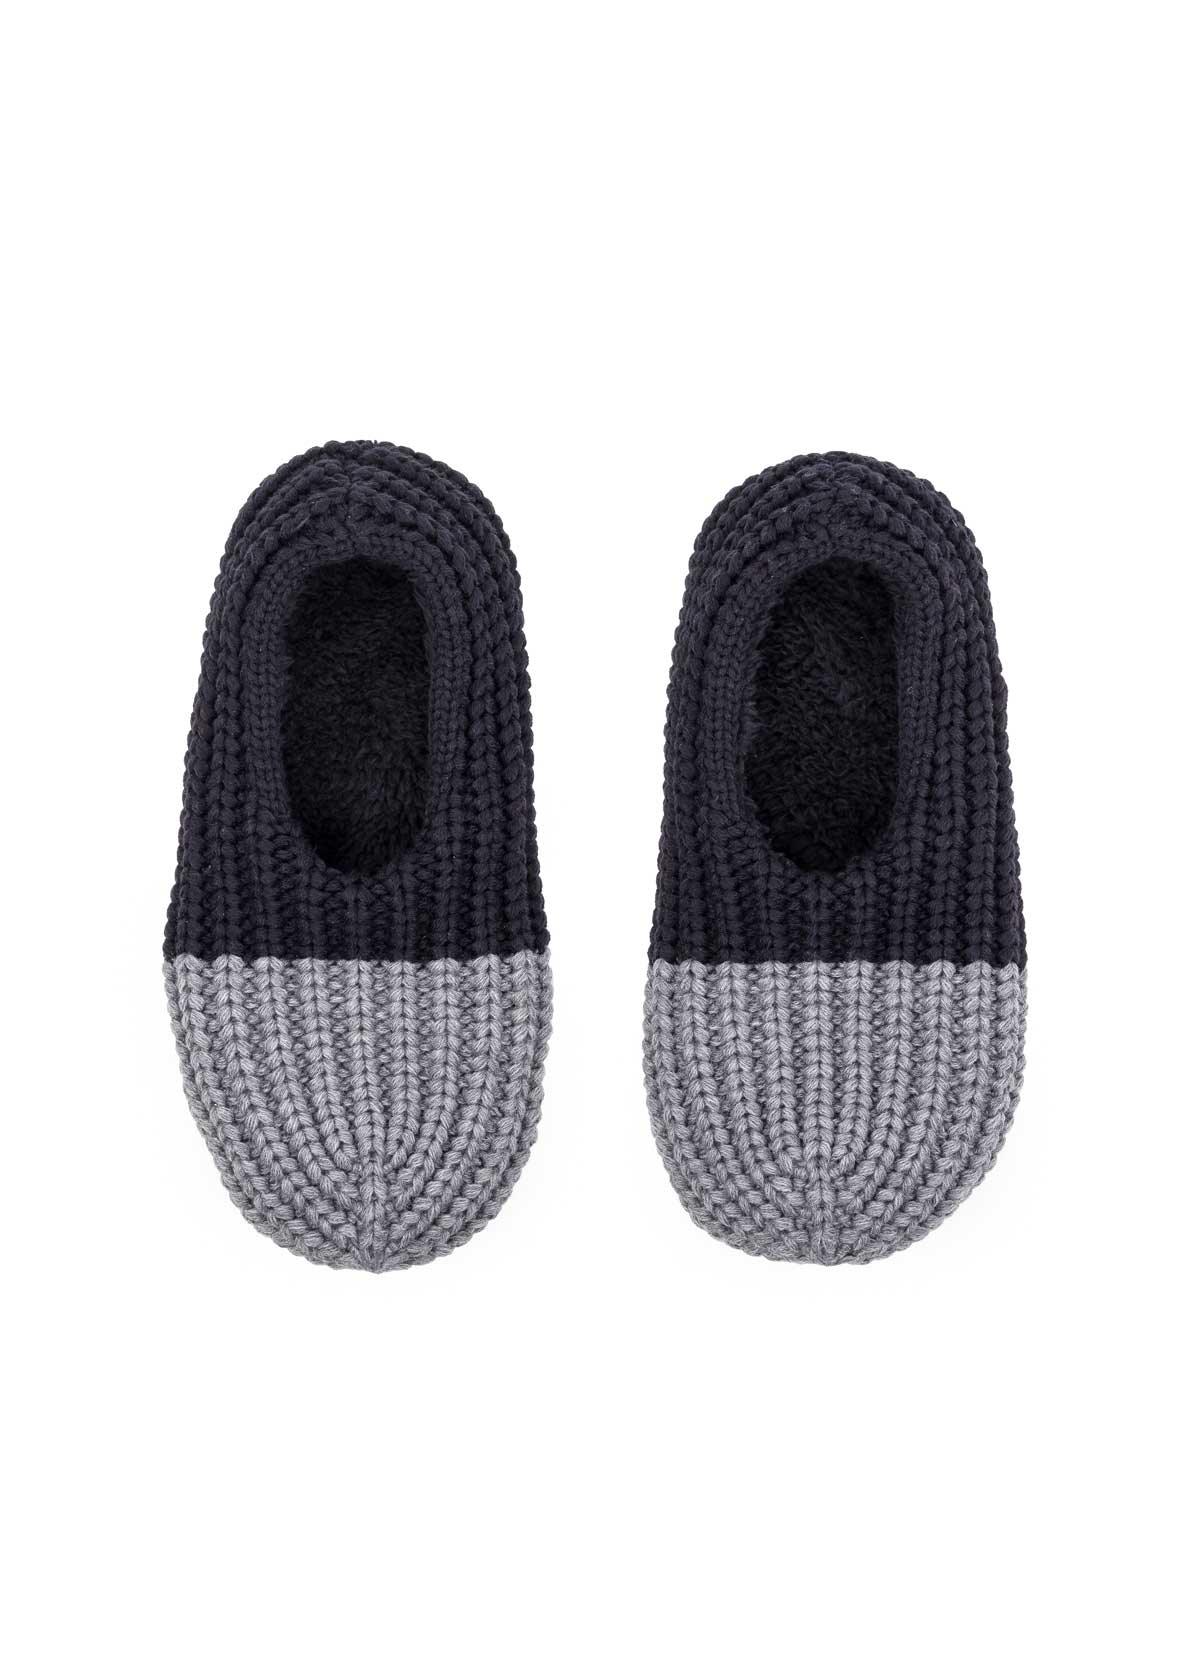 Colorblock Ribbed Slippers - Grey/Black - offe market